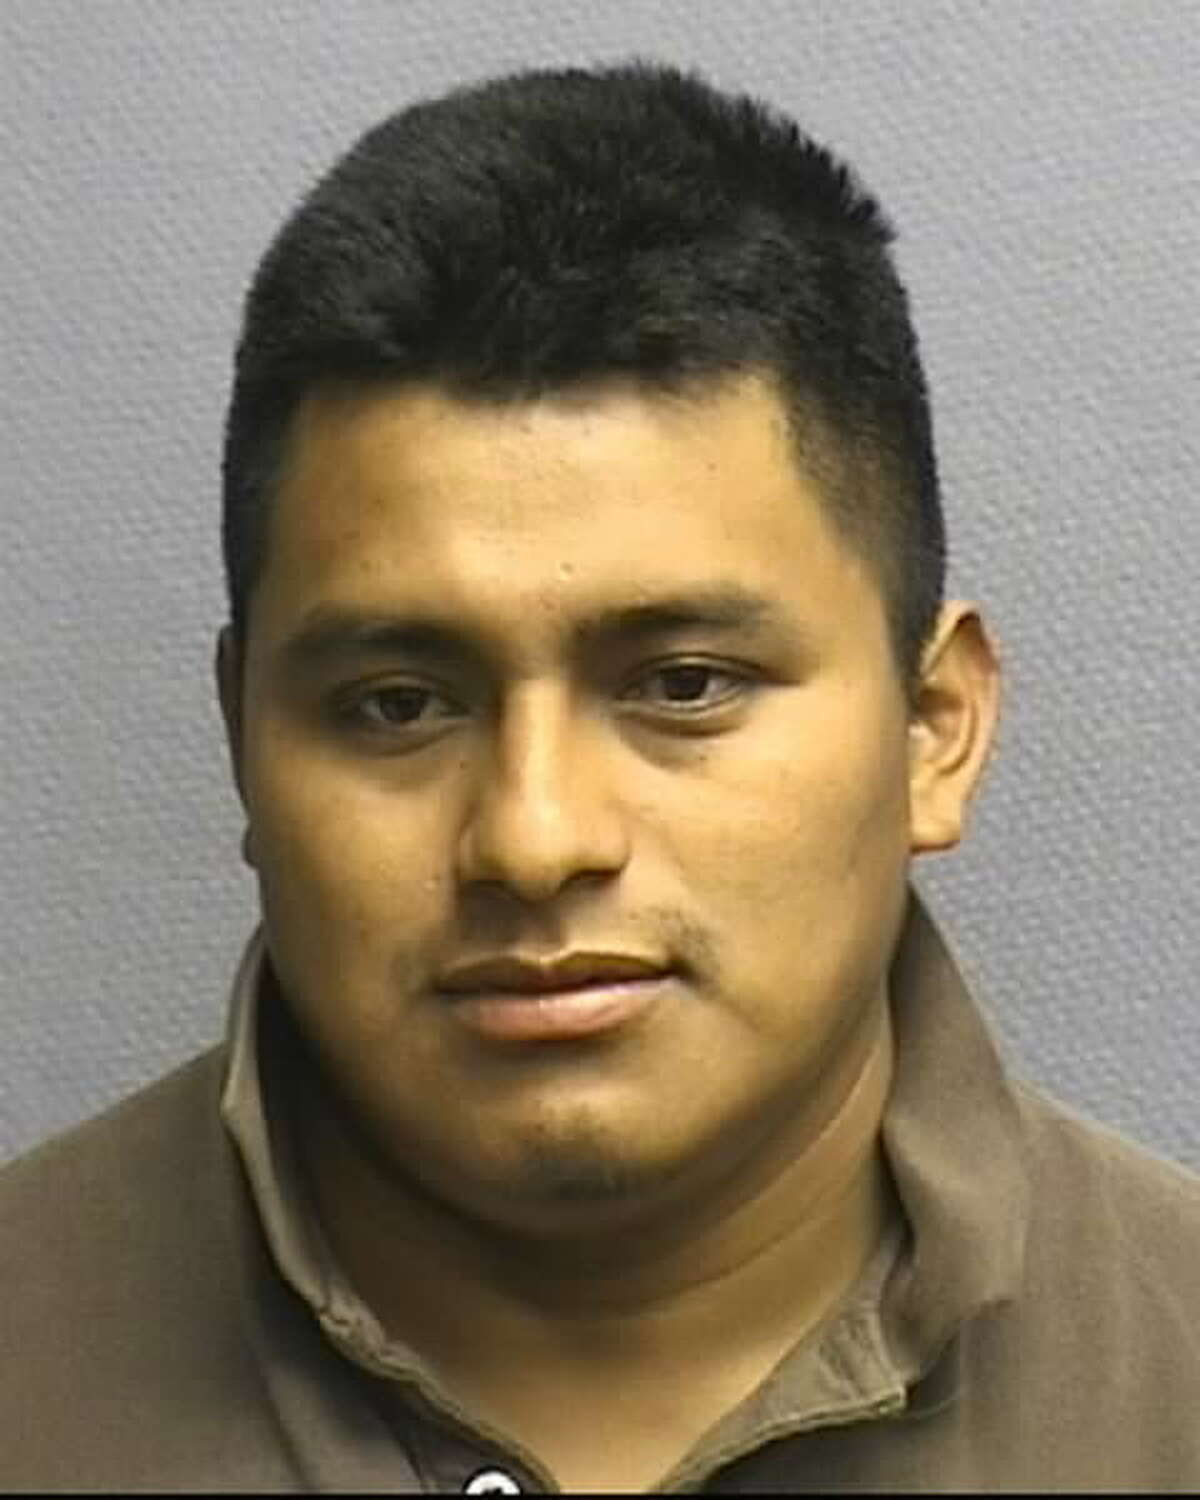 Lorenzo Chub, 25, was arrested by the Houston Police Department following a two month-long prostitution sting in southeast Houston.